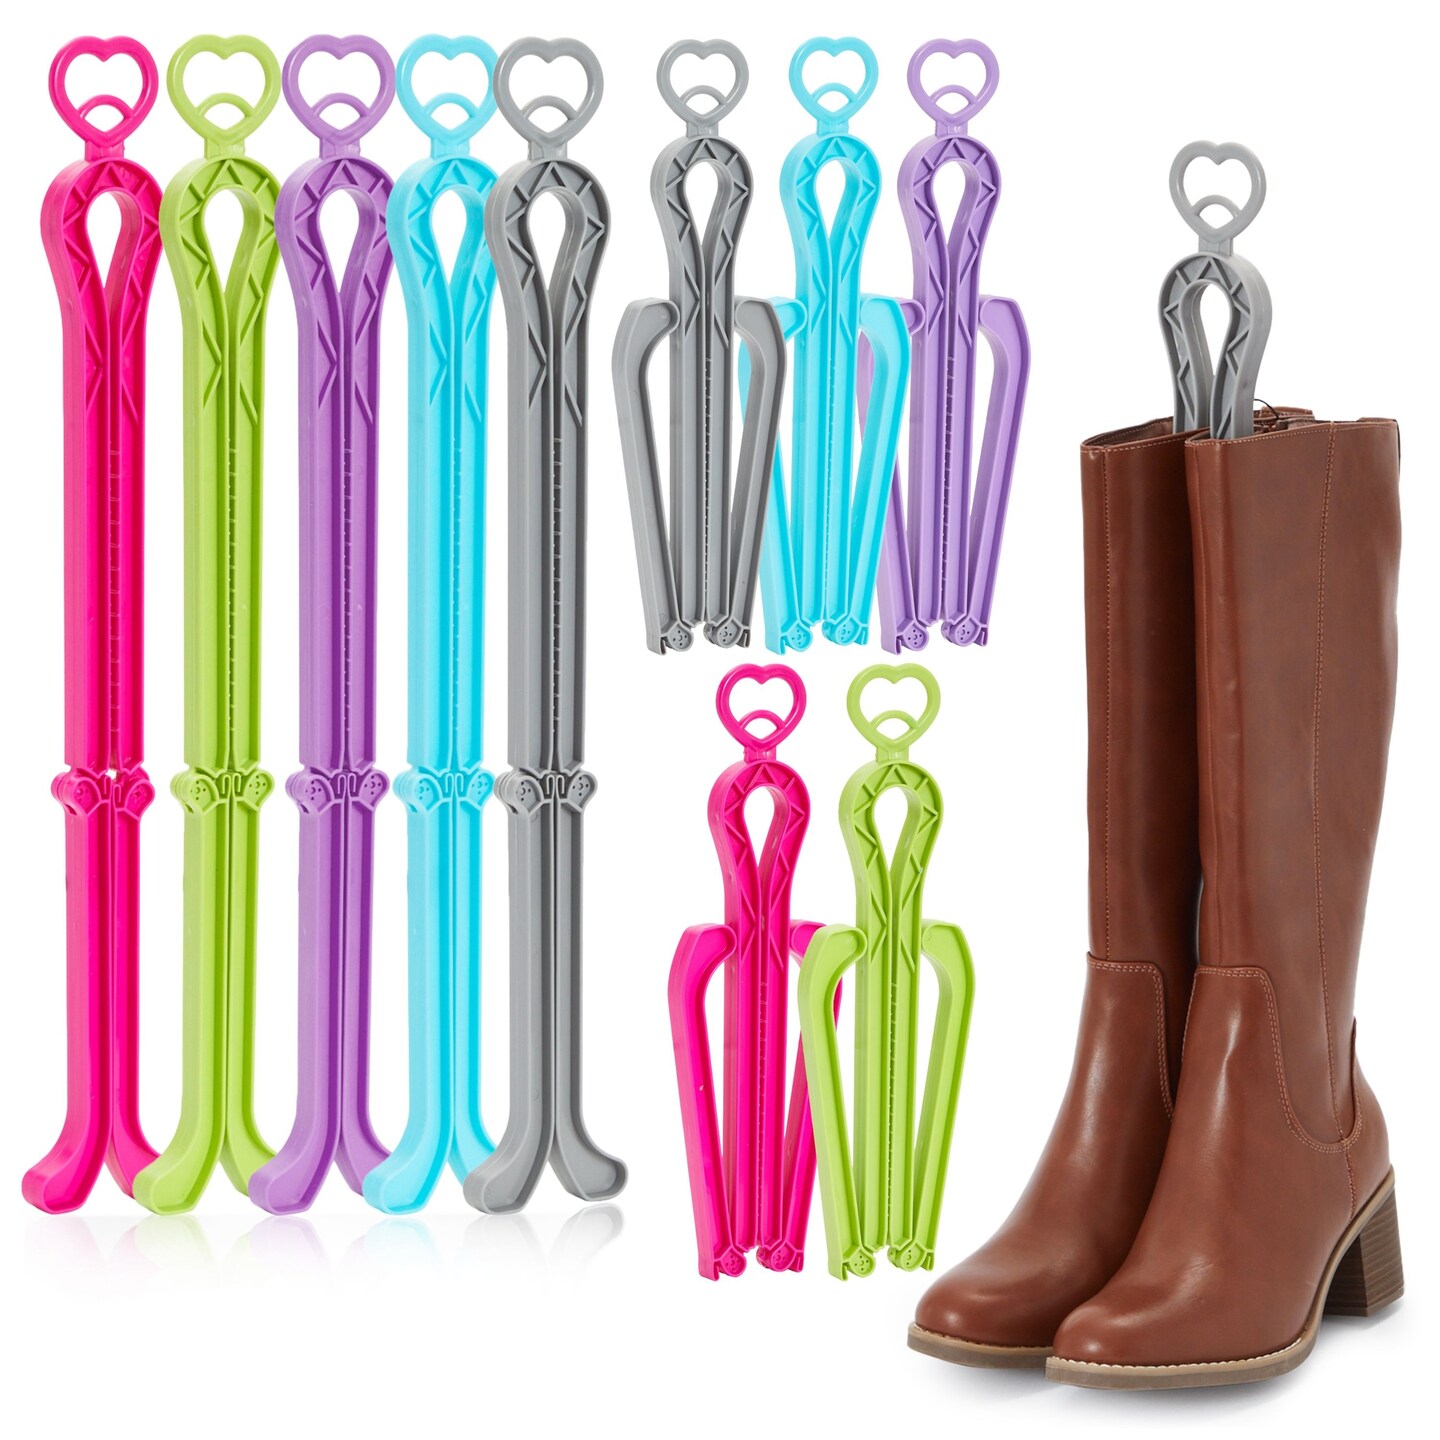 10 Pack Boot Shapers for Tall Boots - Folding Boot Trees, Support Stands, Stand Up Inserts for Women and Men (13 in)